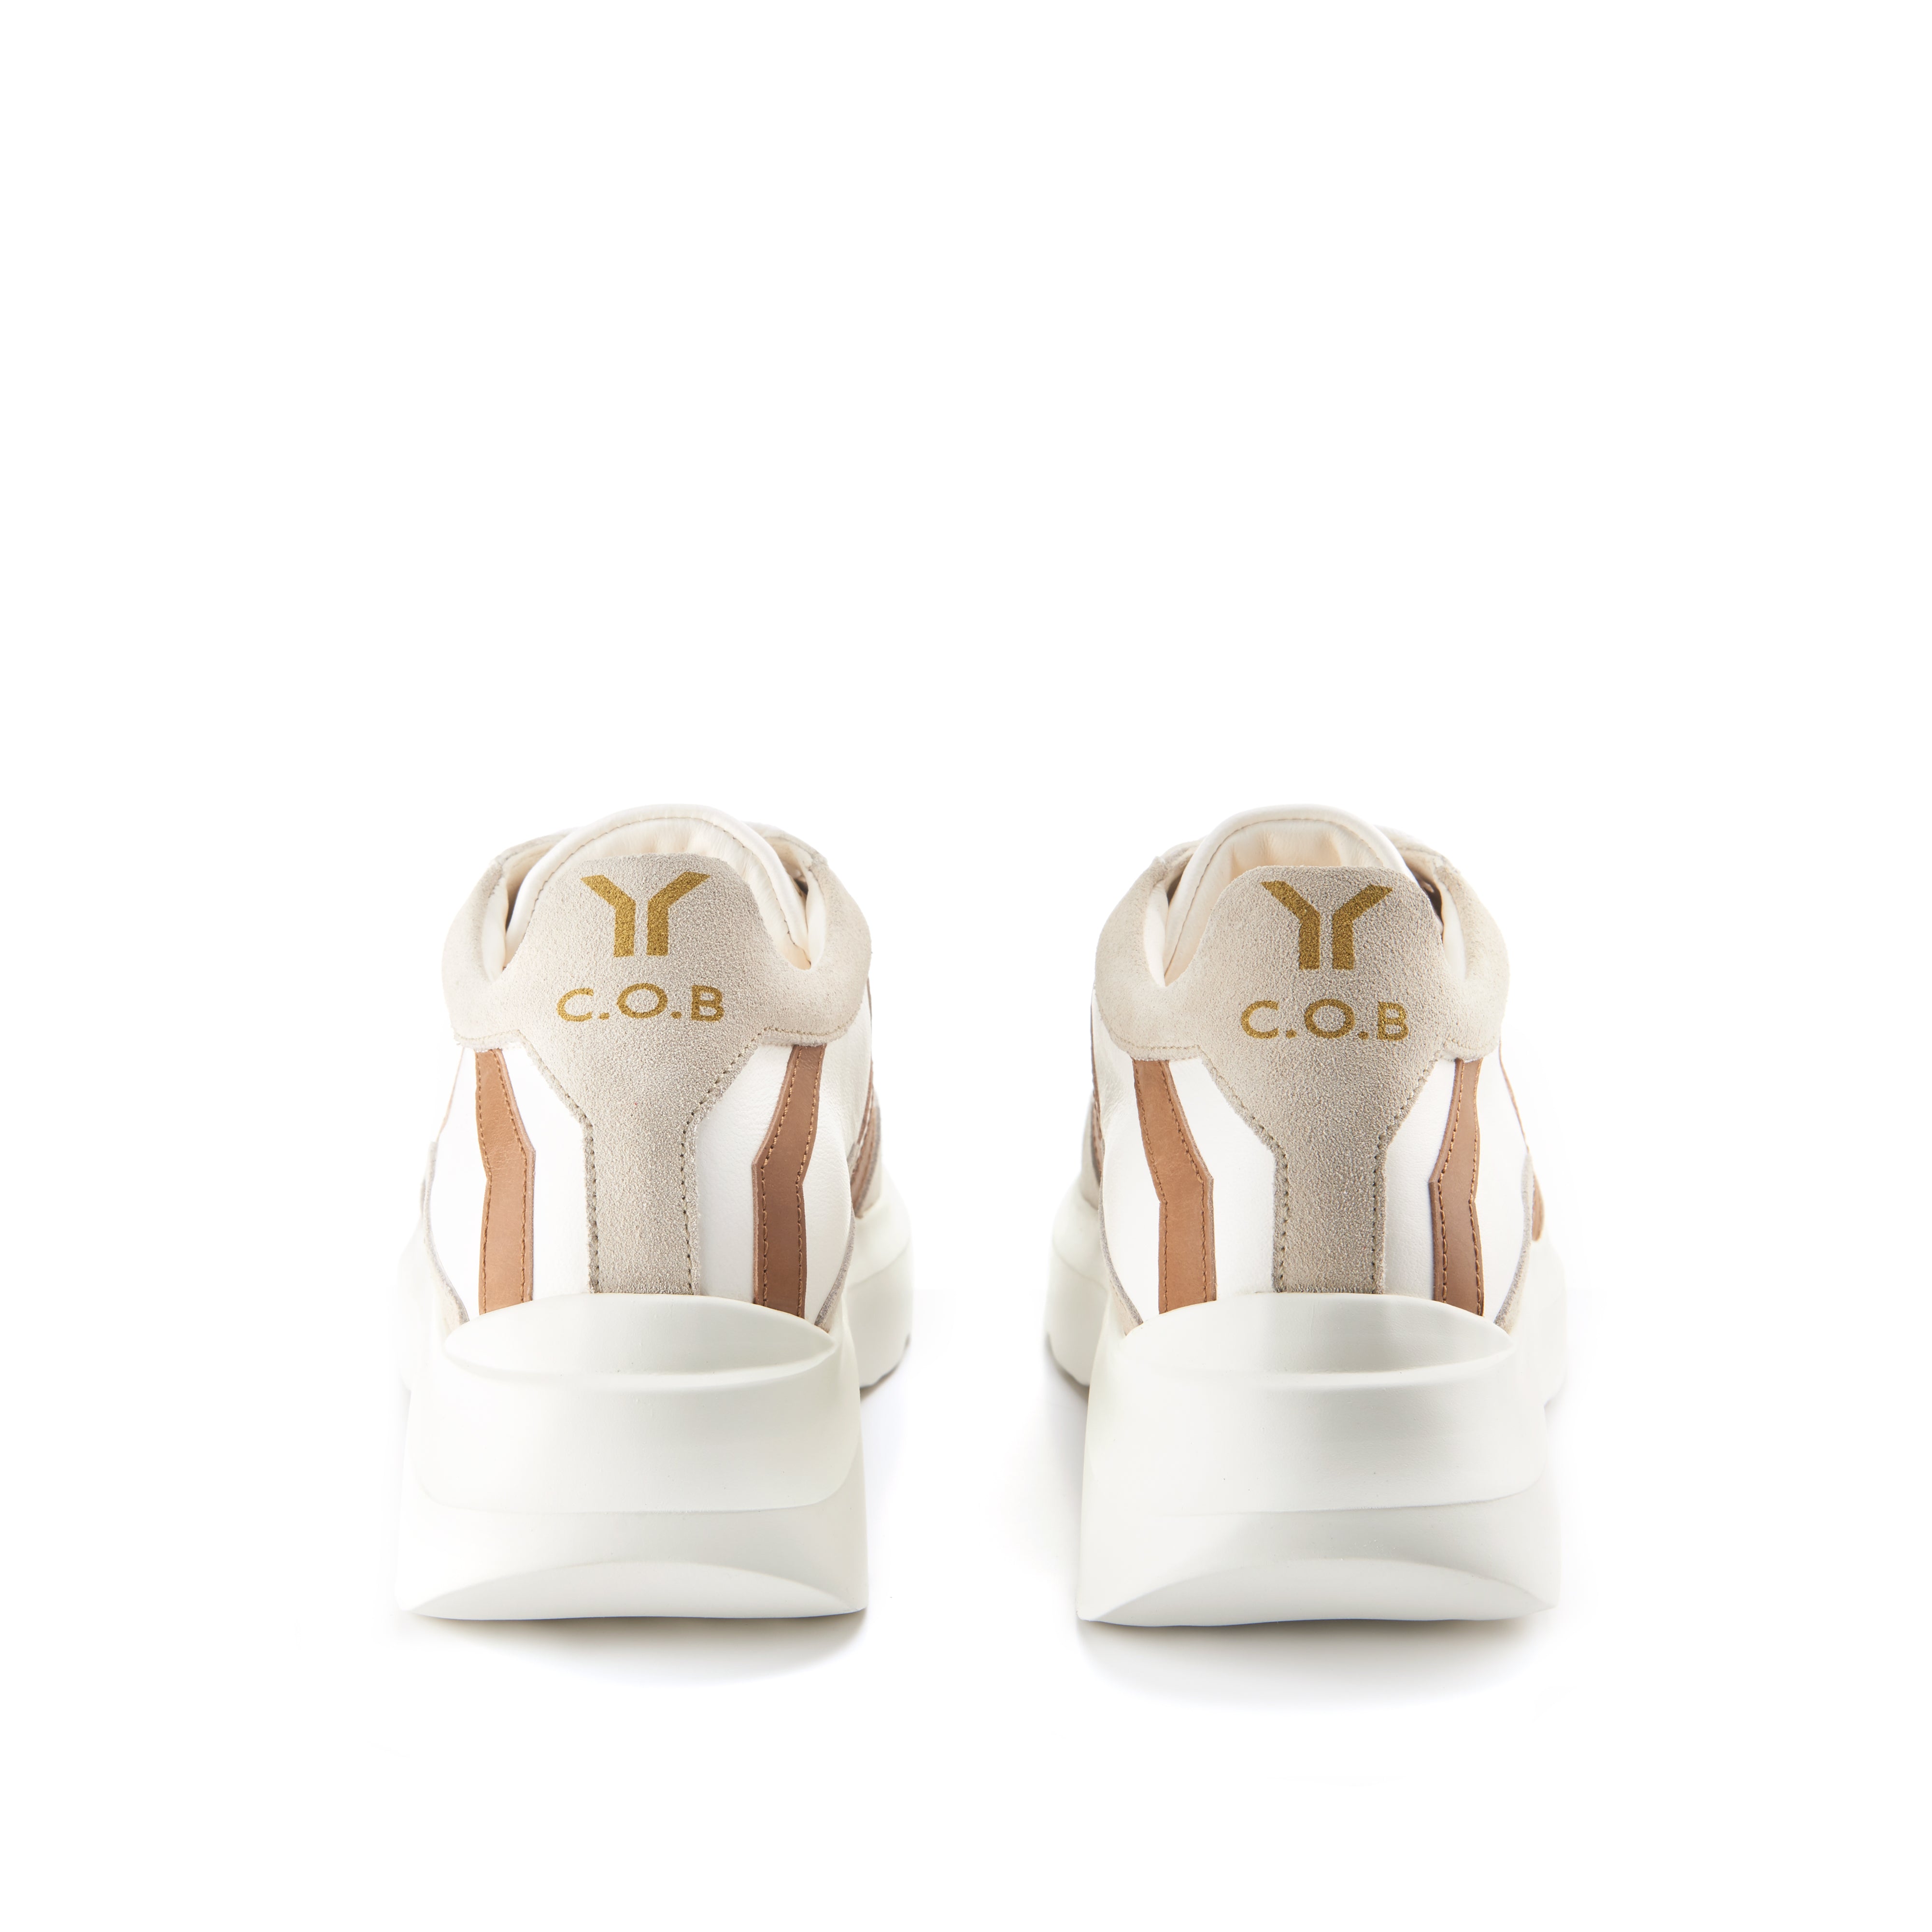 Free Soul_4 Women White leather cuoio wing low cut leather